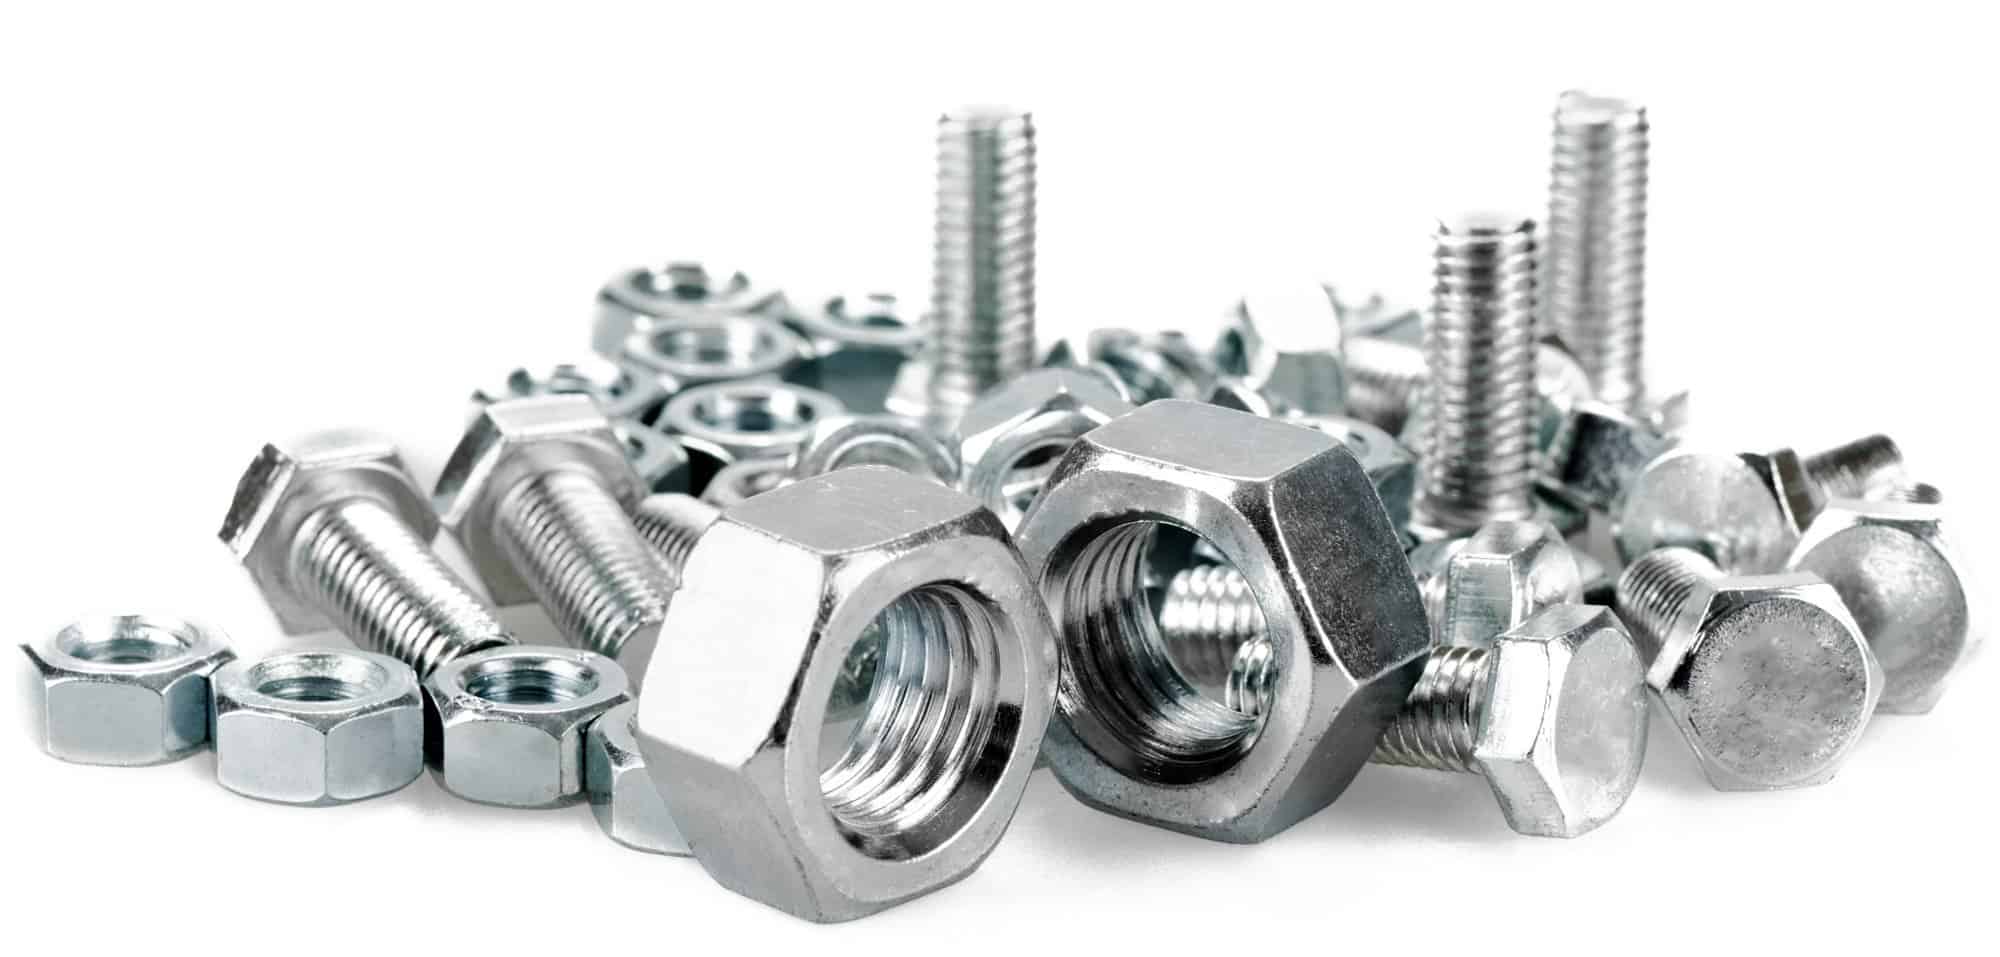 Studs, Bolts, and Fasteners Oh My! The Benefits of Teflon Coated Hardware